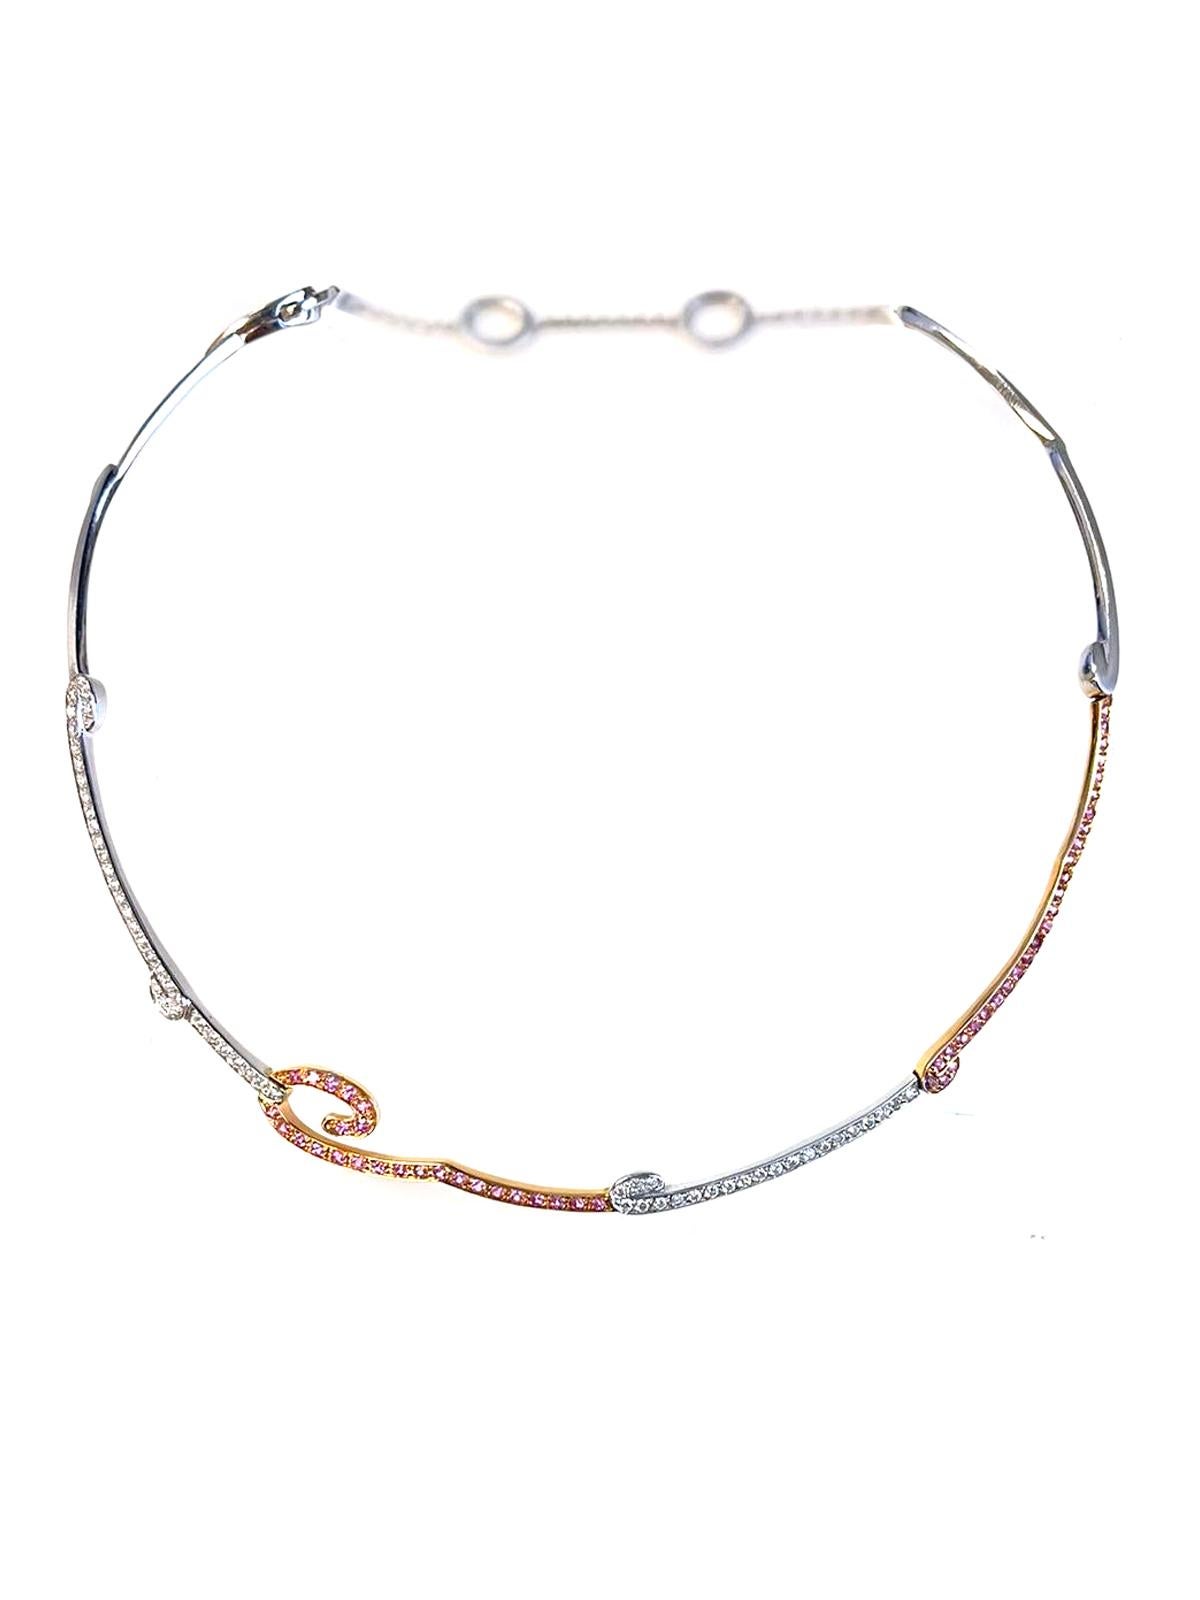 This 2.15 Carat Necklace is a unique and Italyn style piece of 18k Rose Gold and White Gold with Natural Round Diamonds with Pink Sapphires. Designed, created and lovingly in Italyn Design, this unusual necklace is simple, pretty and will go with